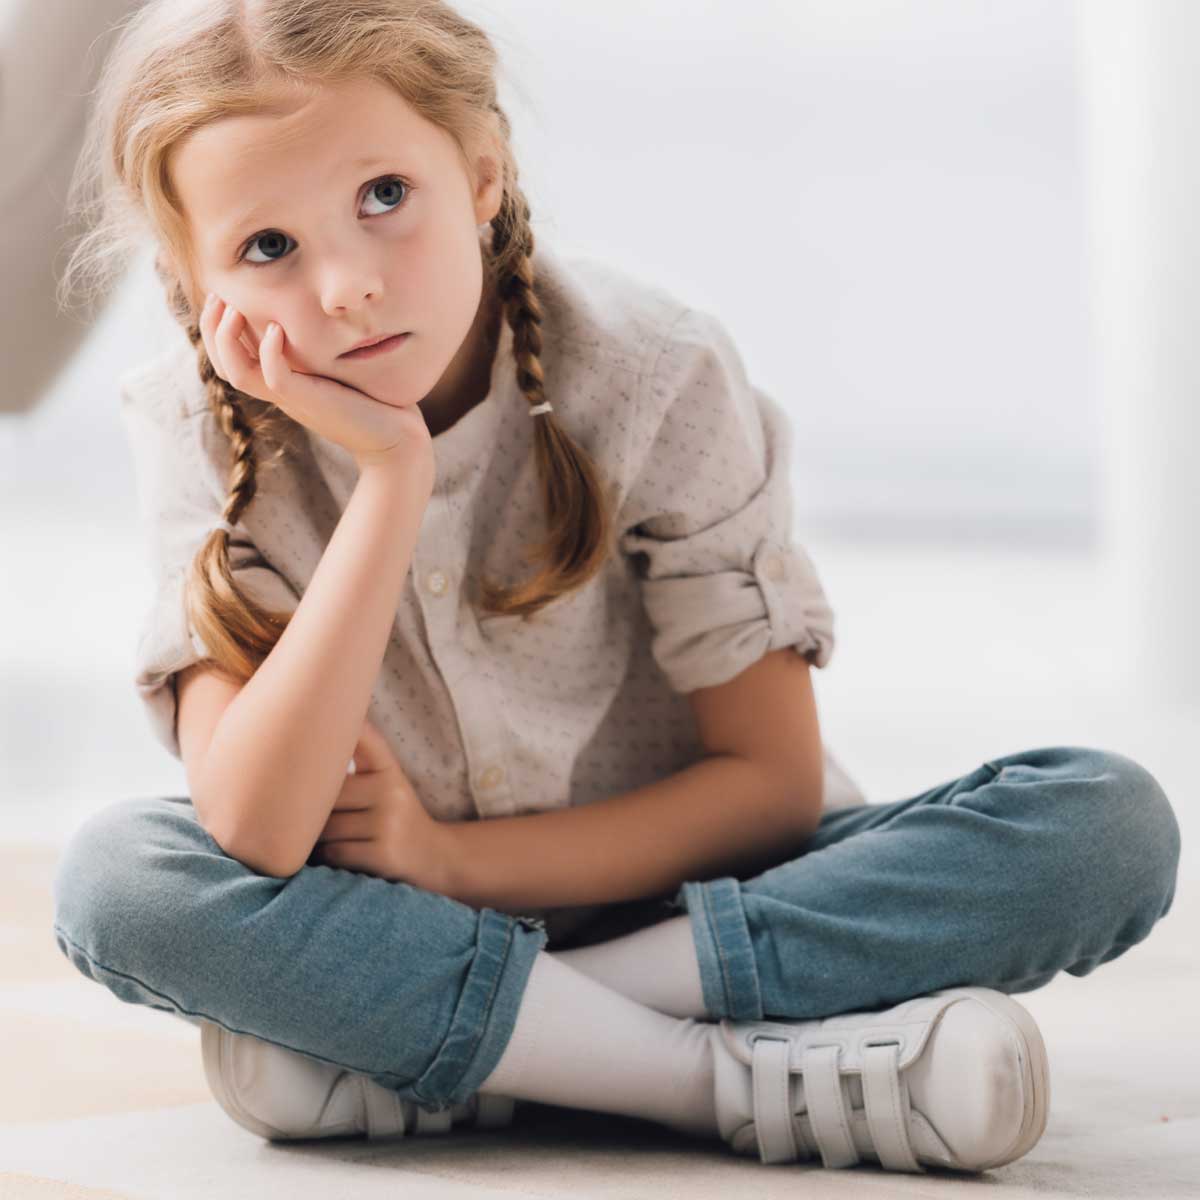 Young child sitting with her legs crossed looking anxious